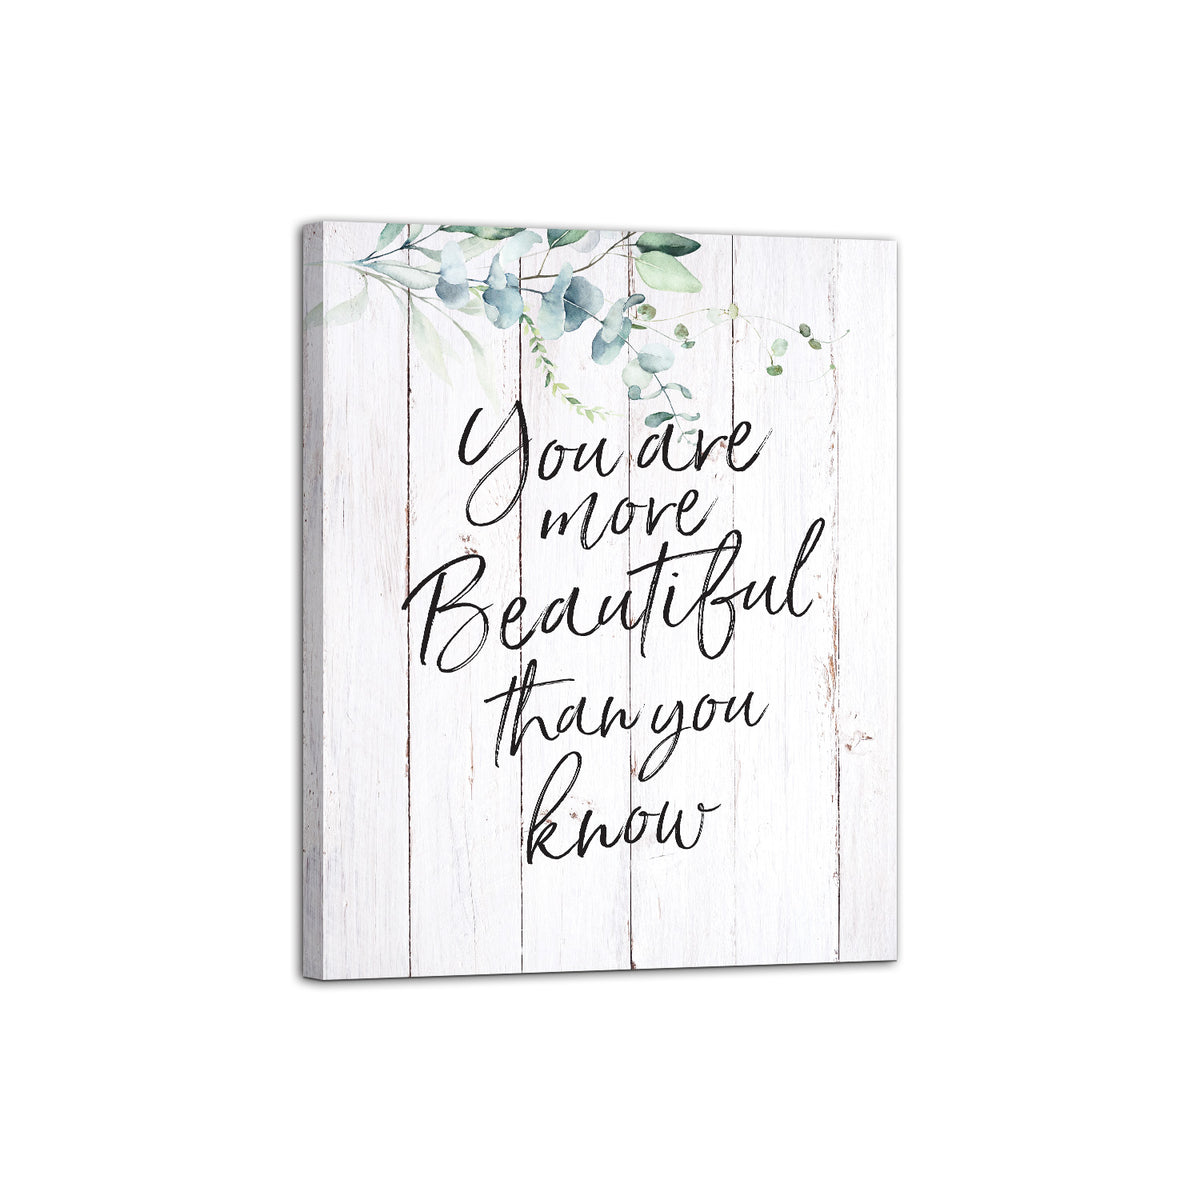 You Are More Beautiful Inspirational Canvas Wall Art Framed Modern Wall Decor Decorative Accents For Walls Ready to Hang for Home Living Room Bedroom Entryway Kitchen Office Size 30”x 40”